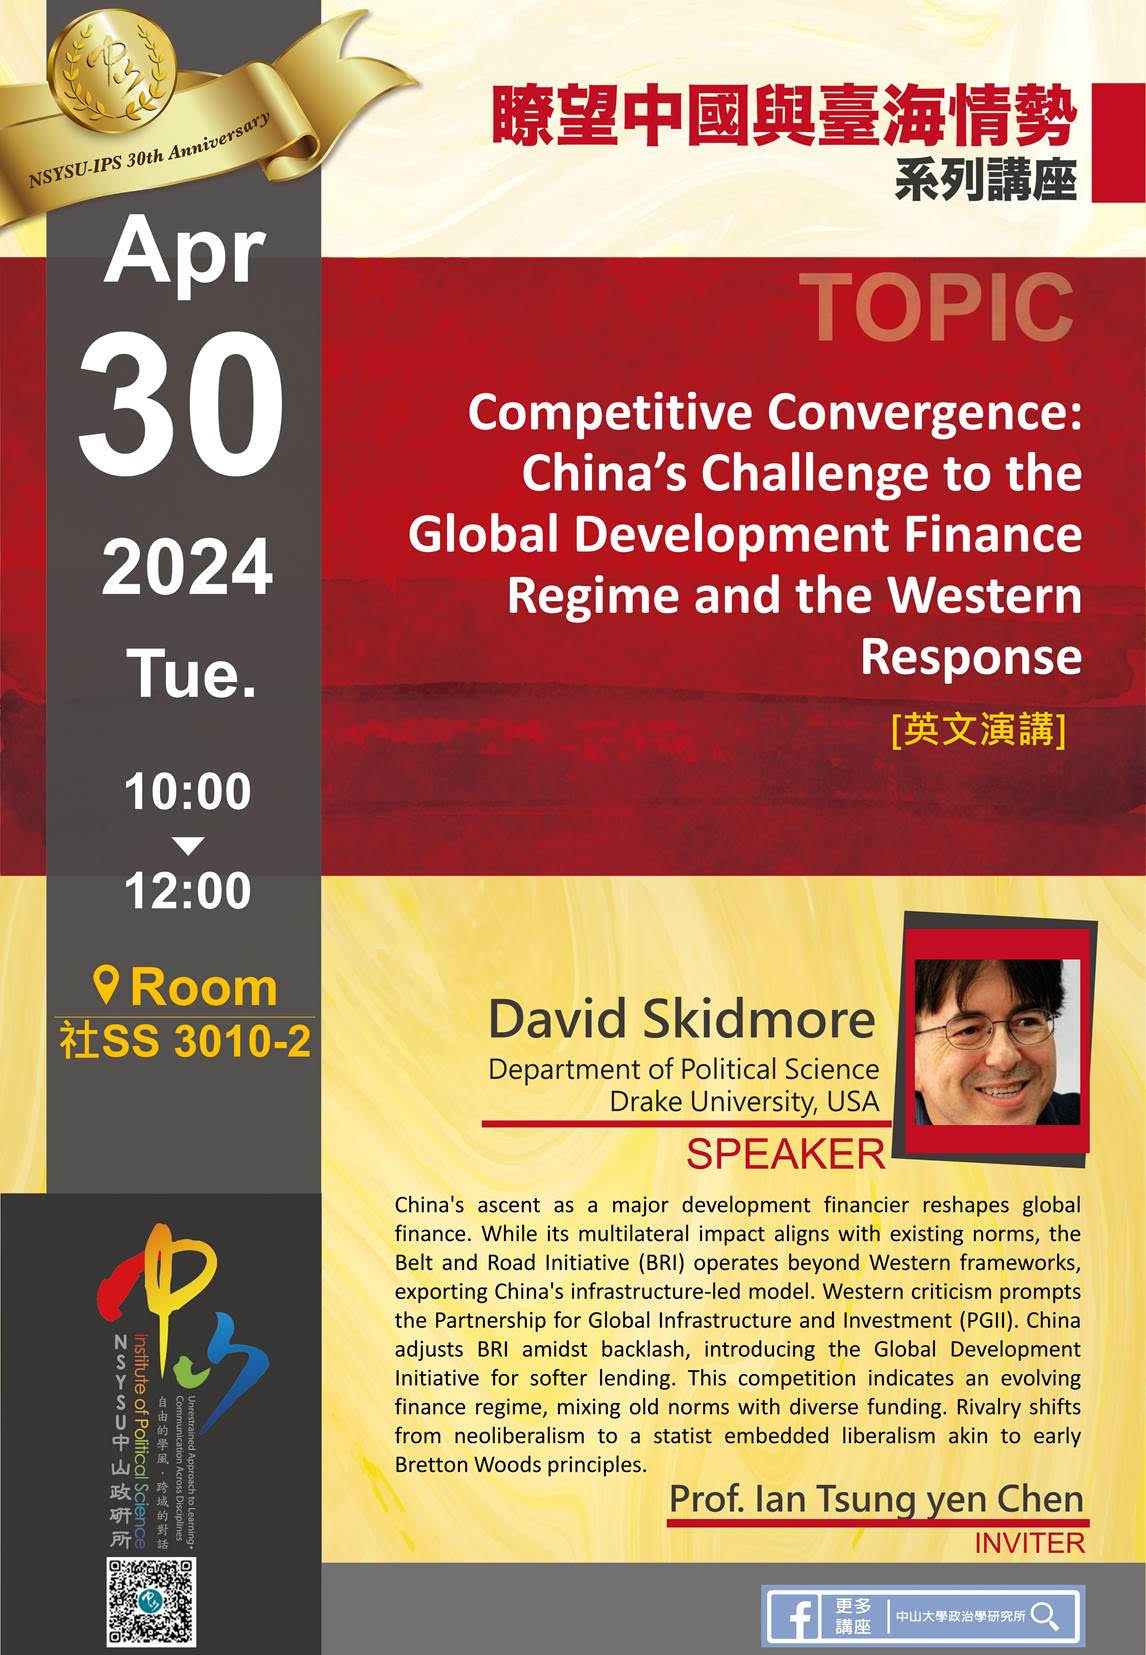 David Skidmore : Competitive Convergence: China’s Challenge to the Global Development Finance Regime and the Western Response